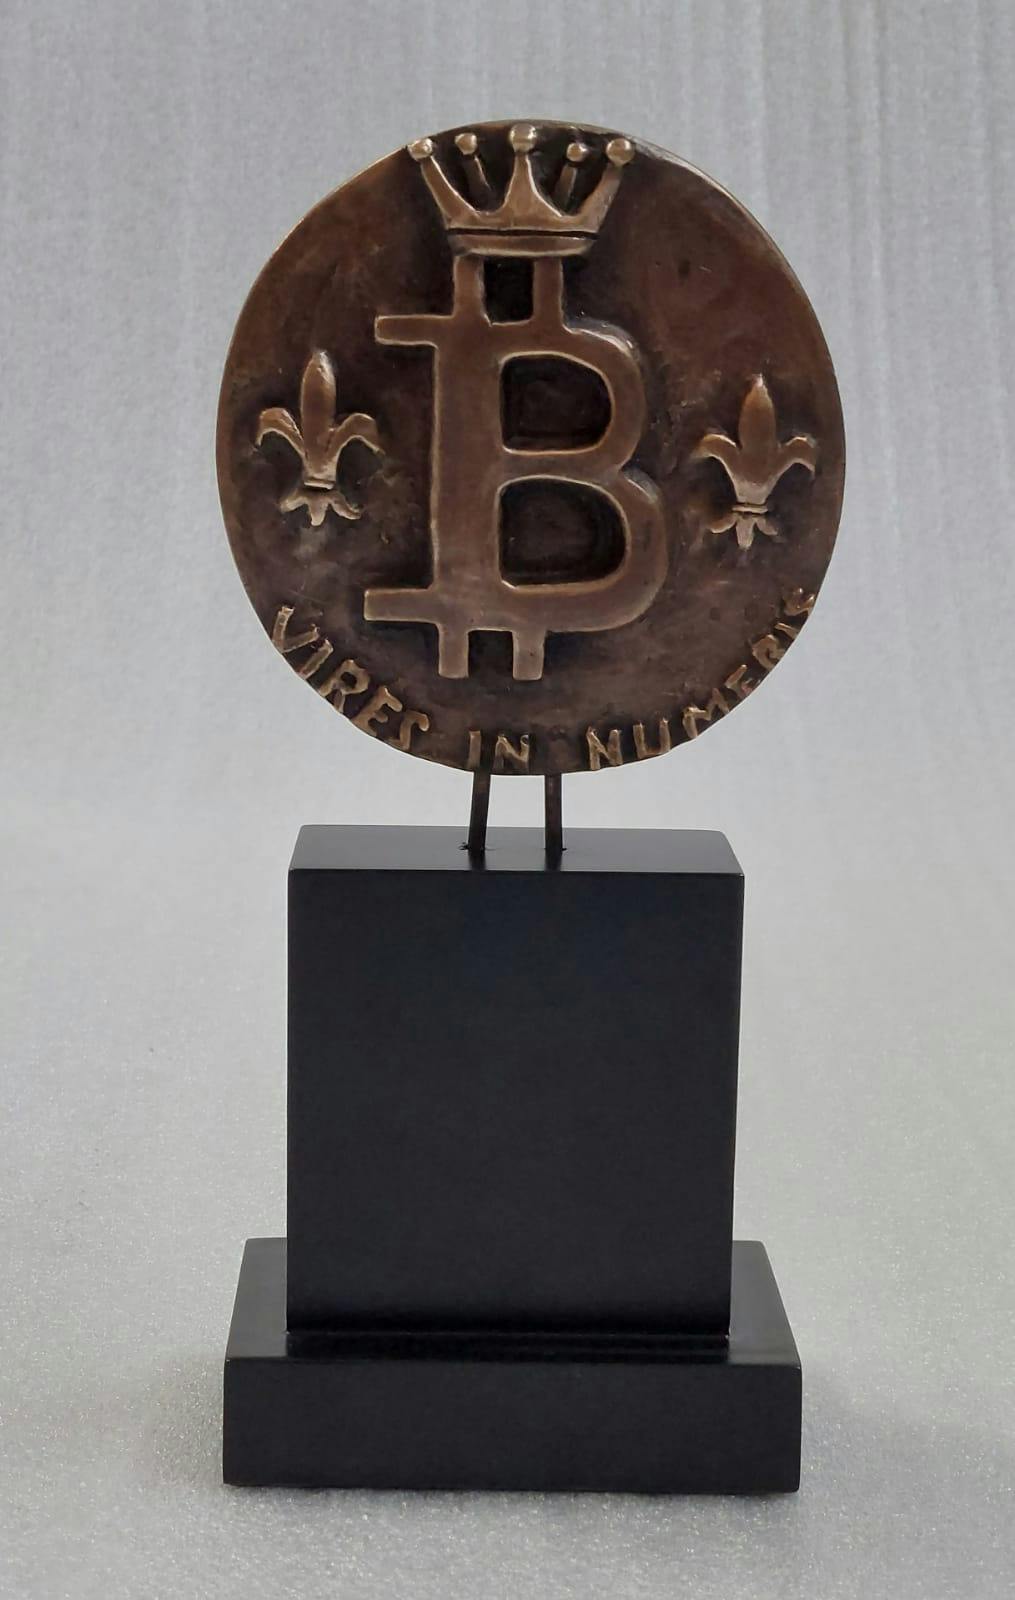 Picture of the Fortuna Bitcoin made by Isabelle Esnult